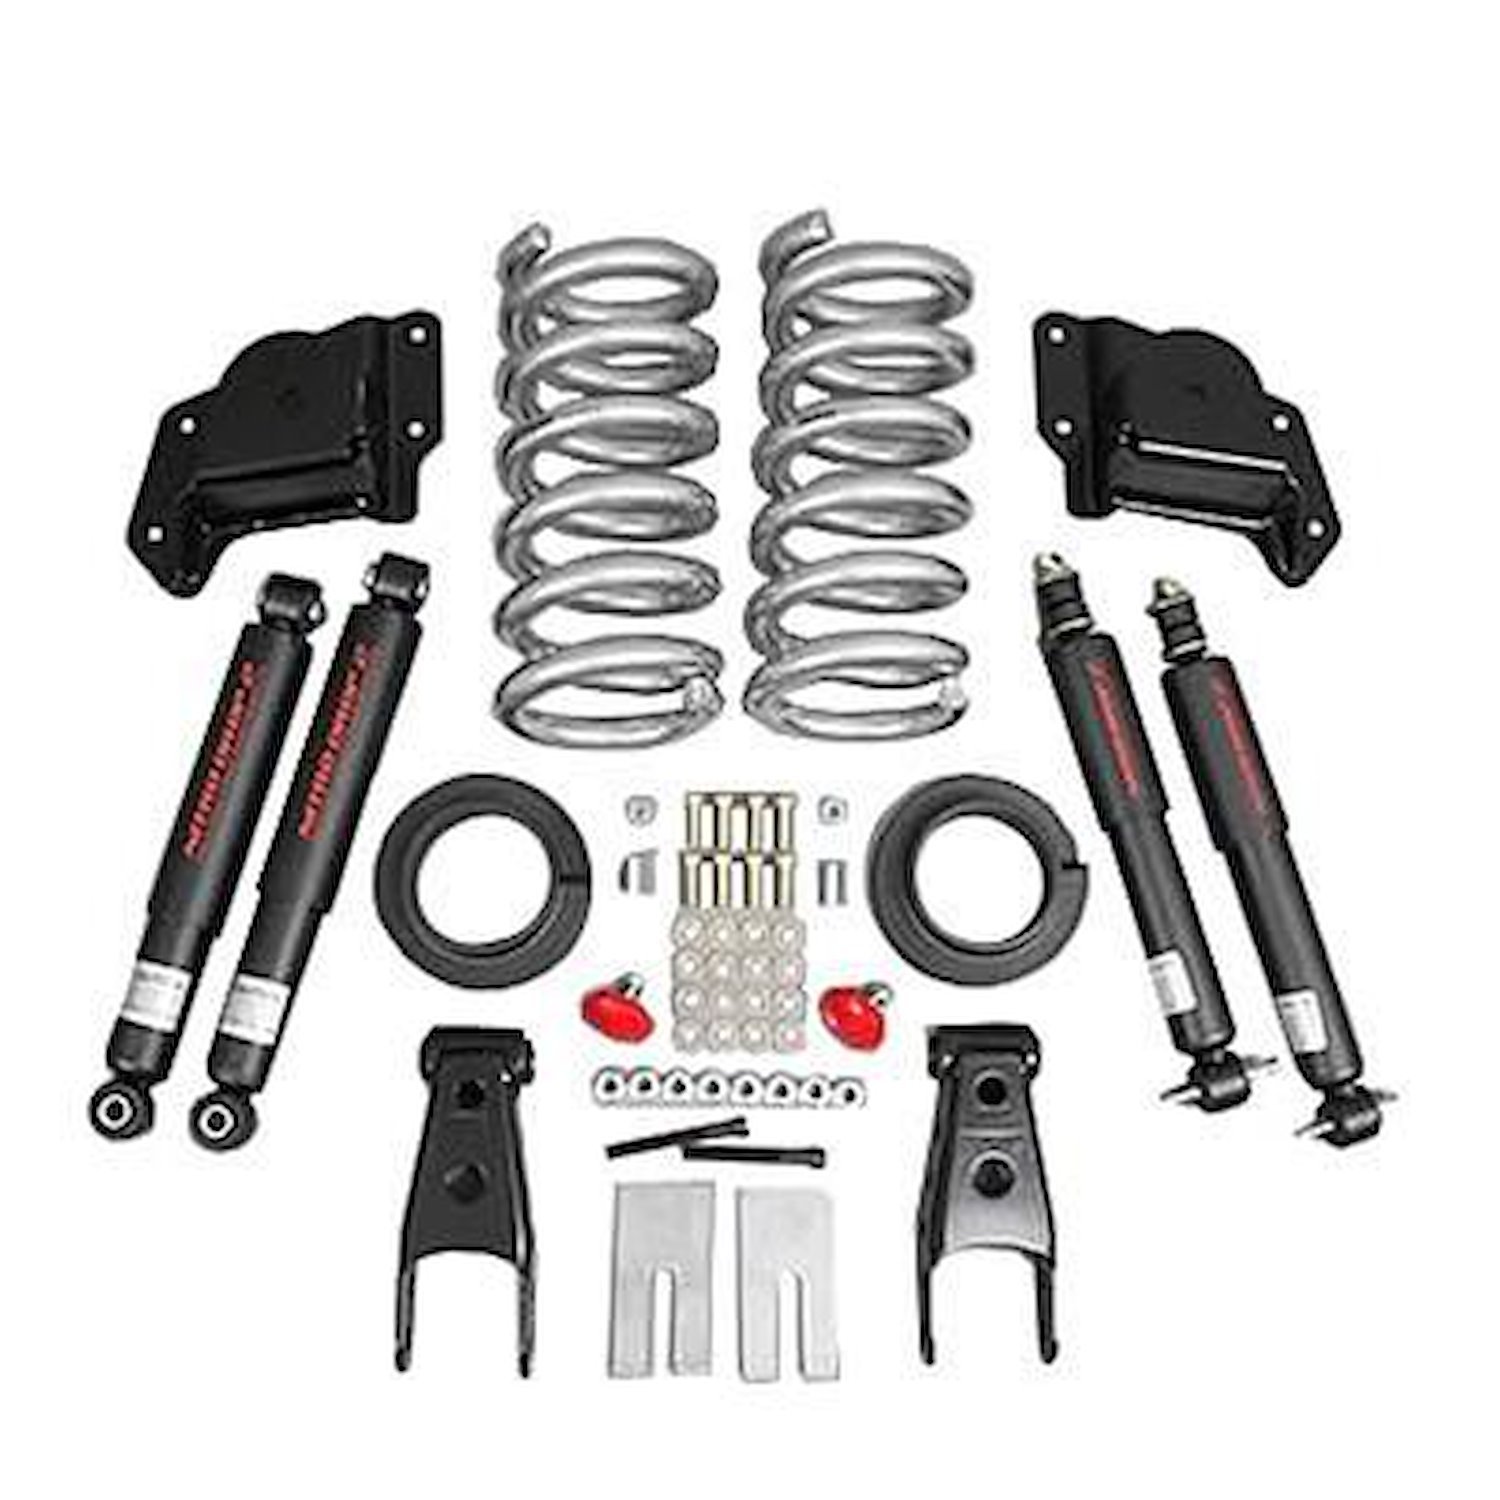 Complete Lowering Kit for 1997-2002 Ford Expedition/Lincoln Navigator